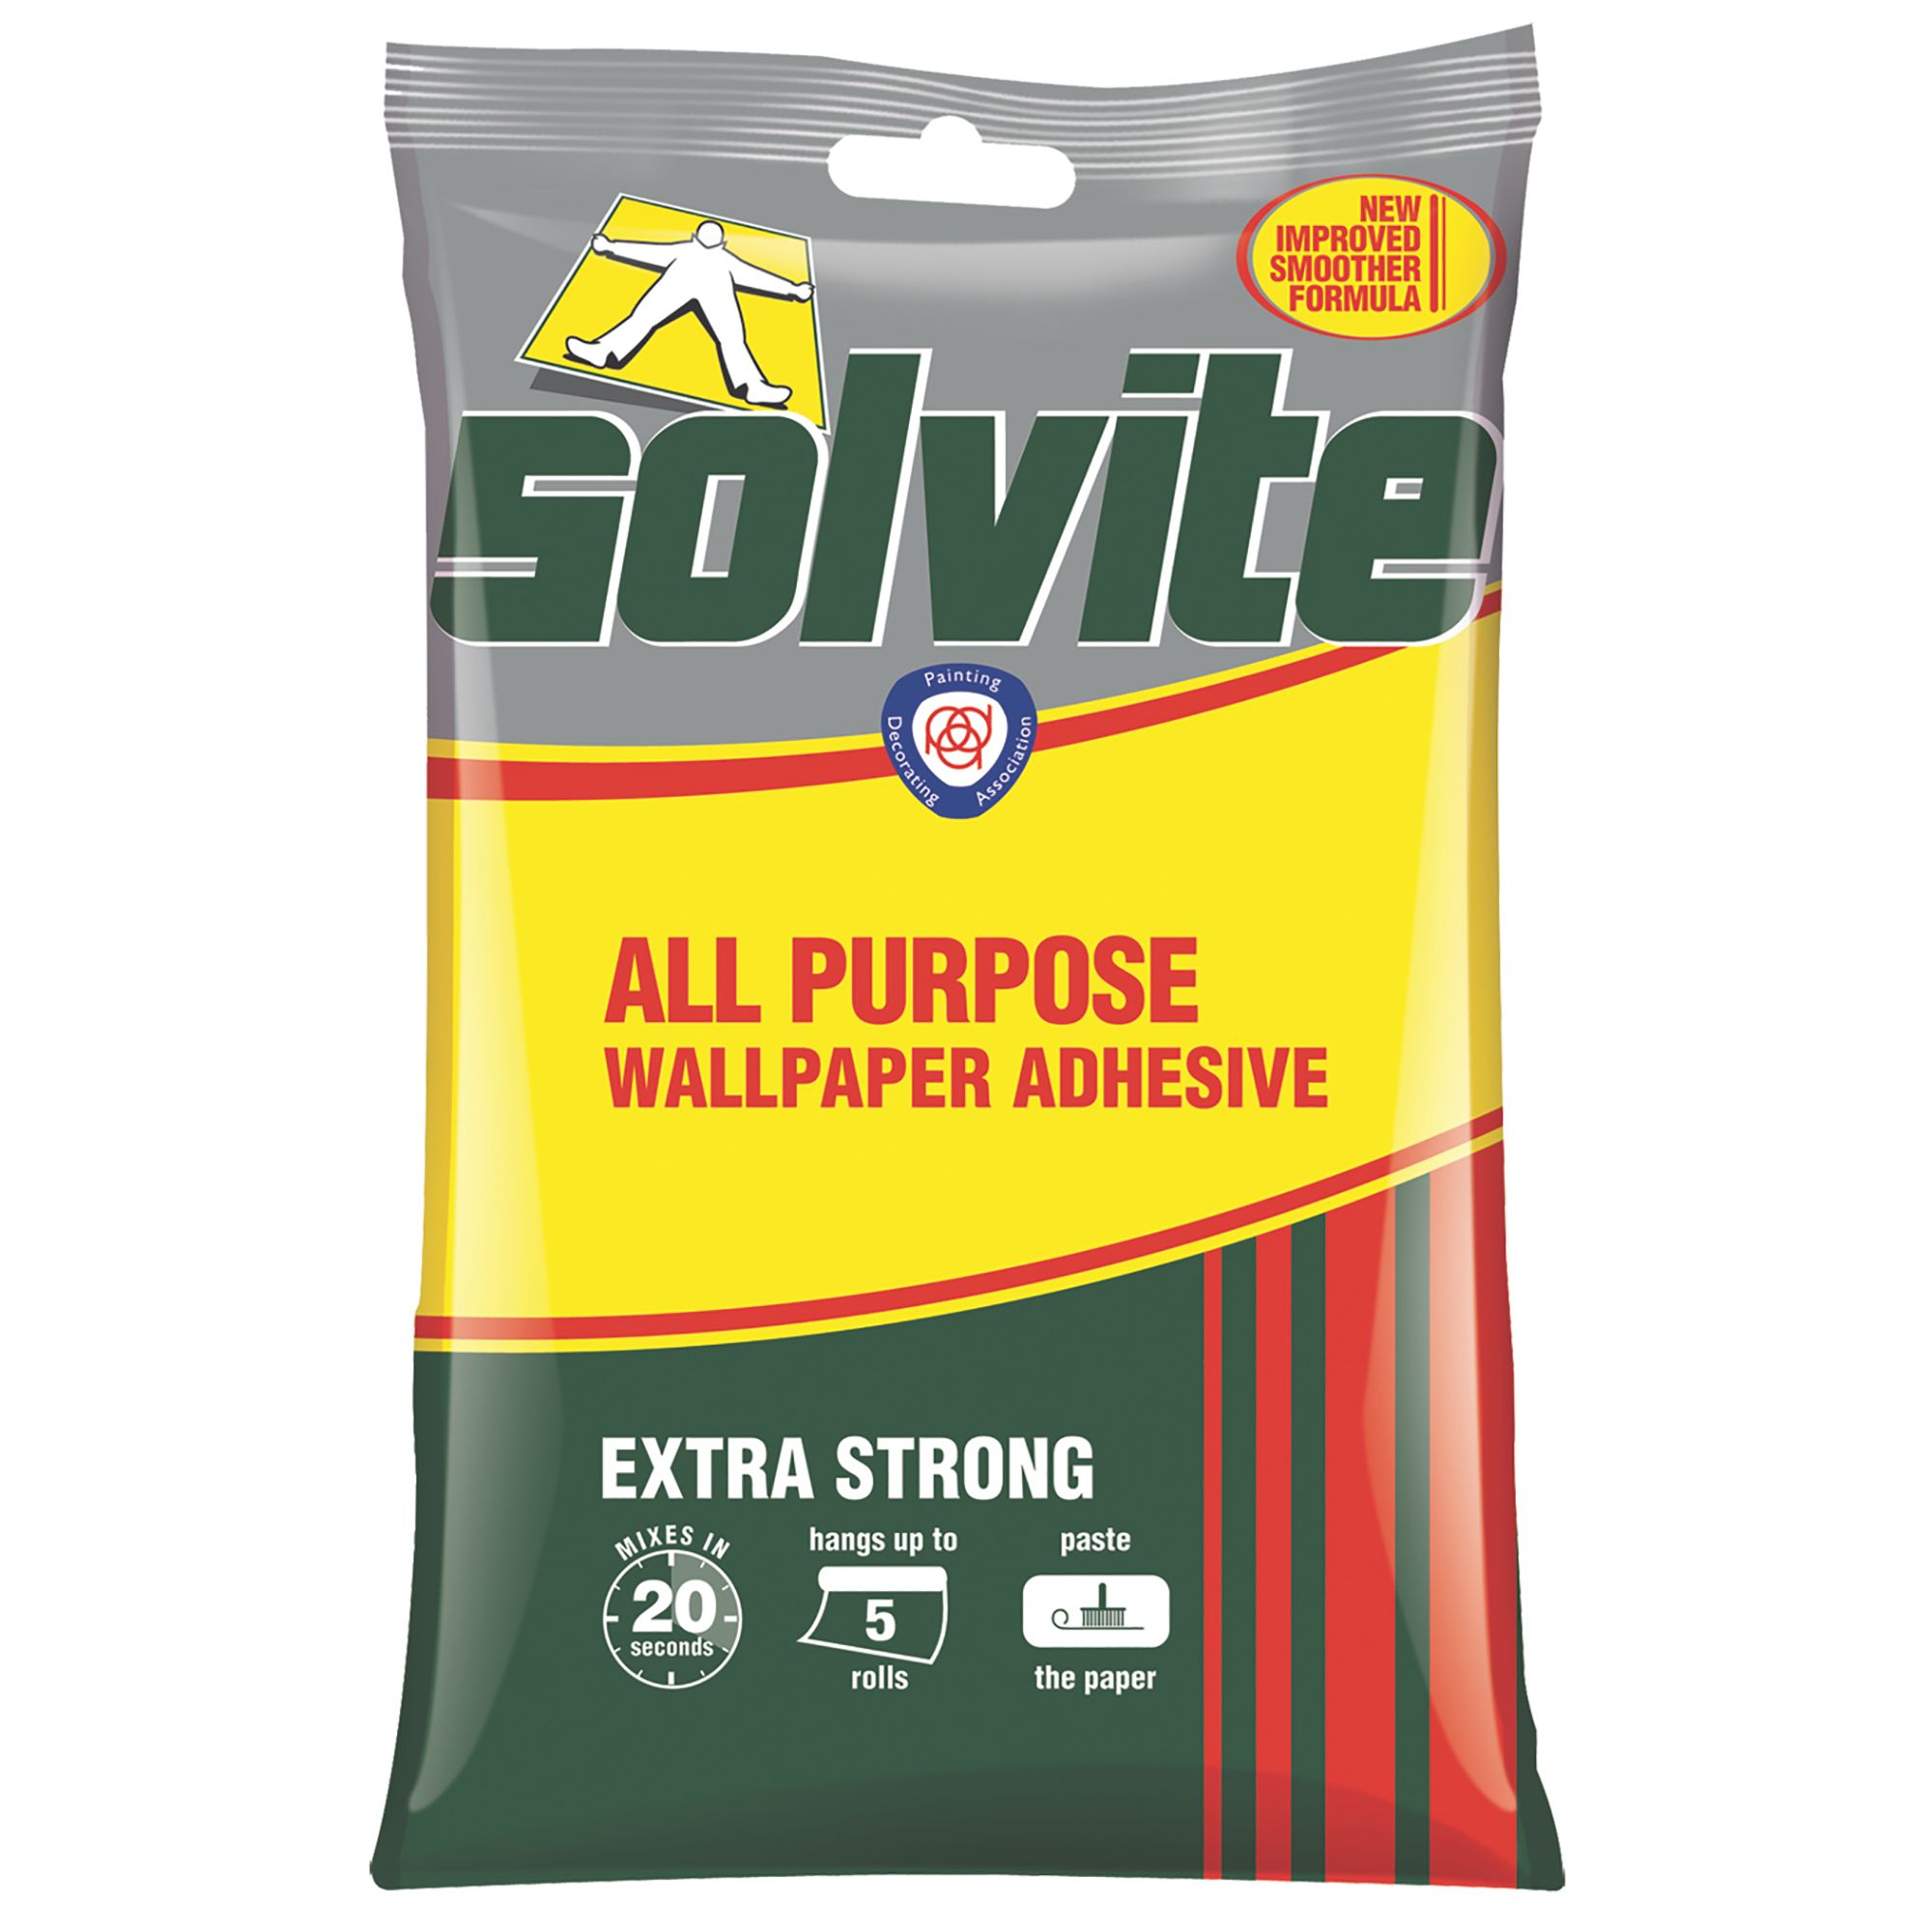 SOLVITE Paste The Wall Wallpaper Paste - 50% EXTRA FREE hang up to 30 Rolls